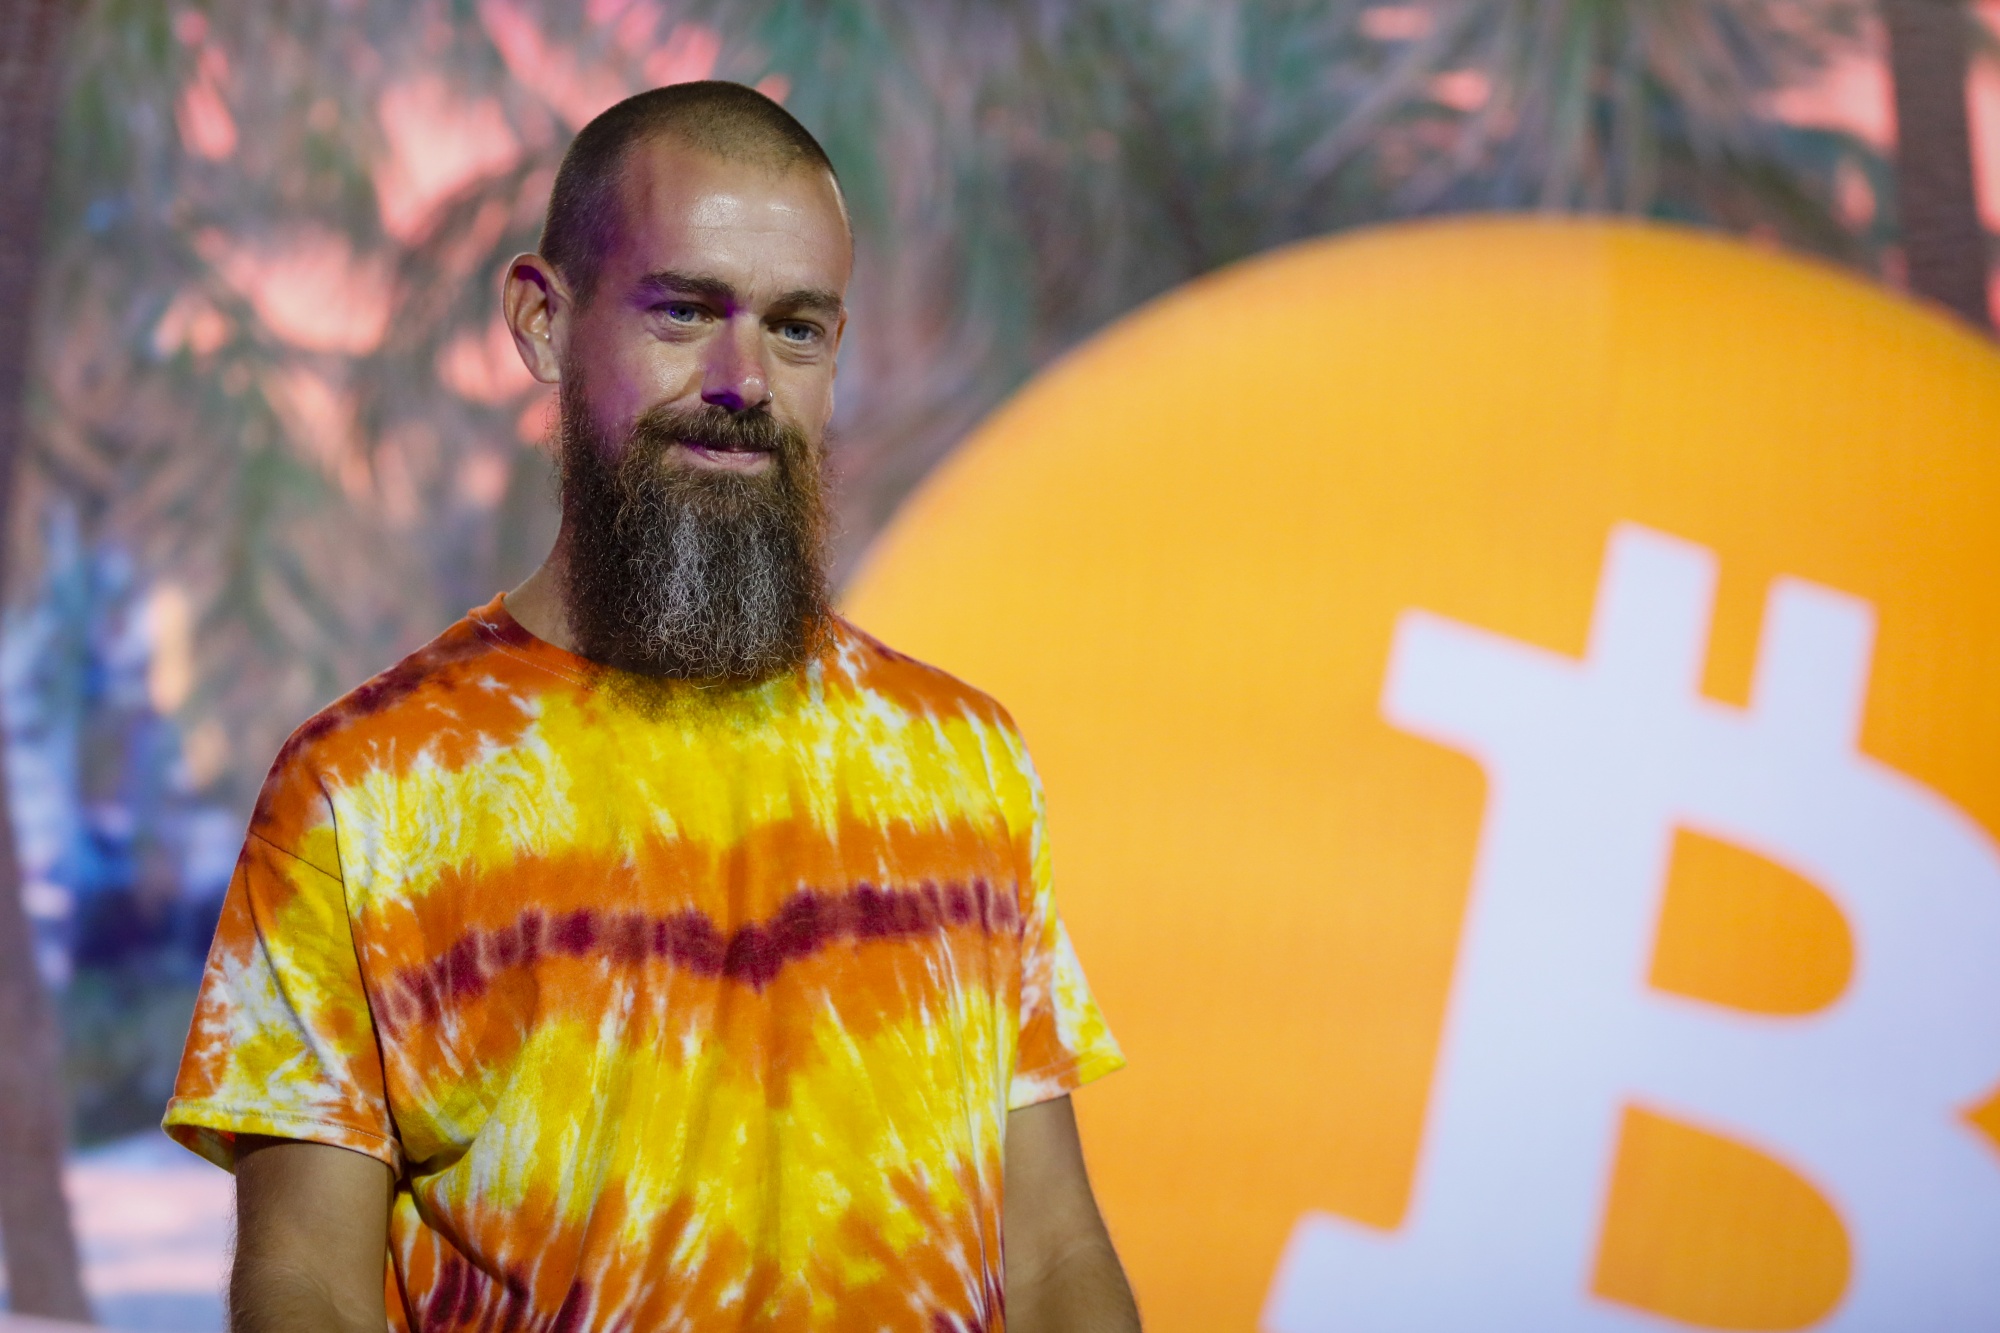 Jack Dorsey speaks at the Bitcoin 2021 conference in Miami, Florida.